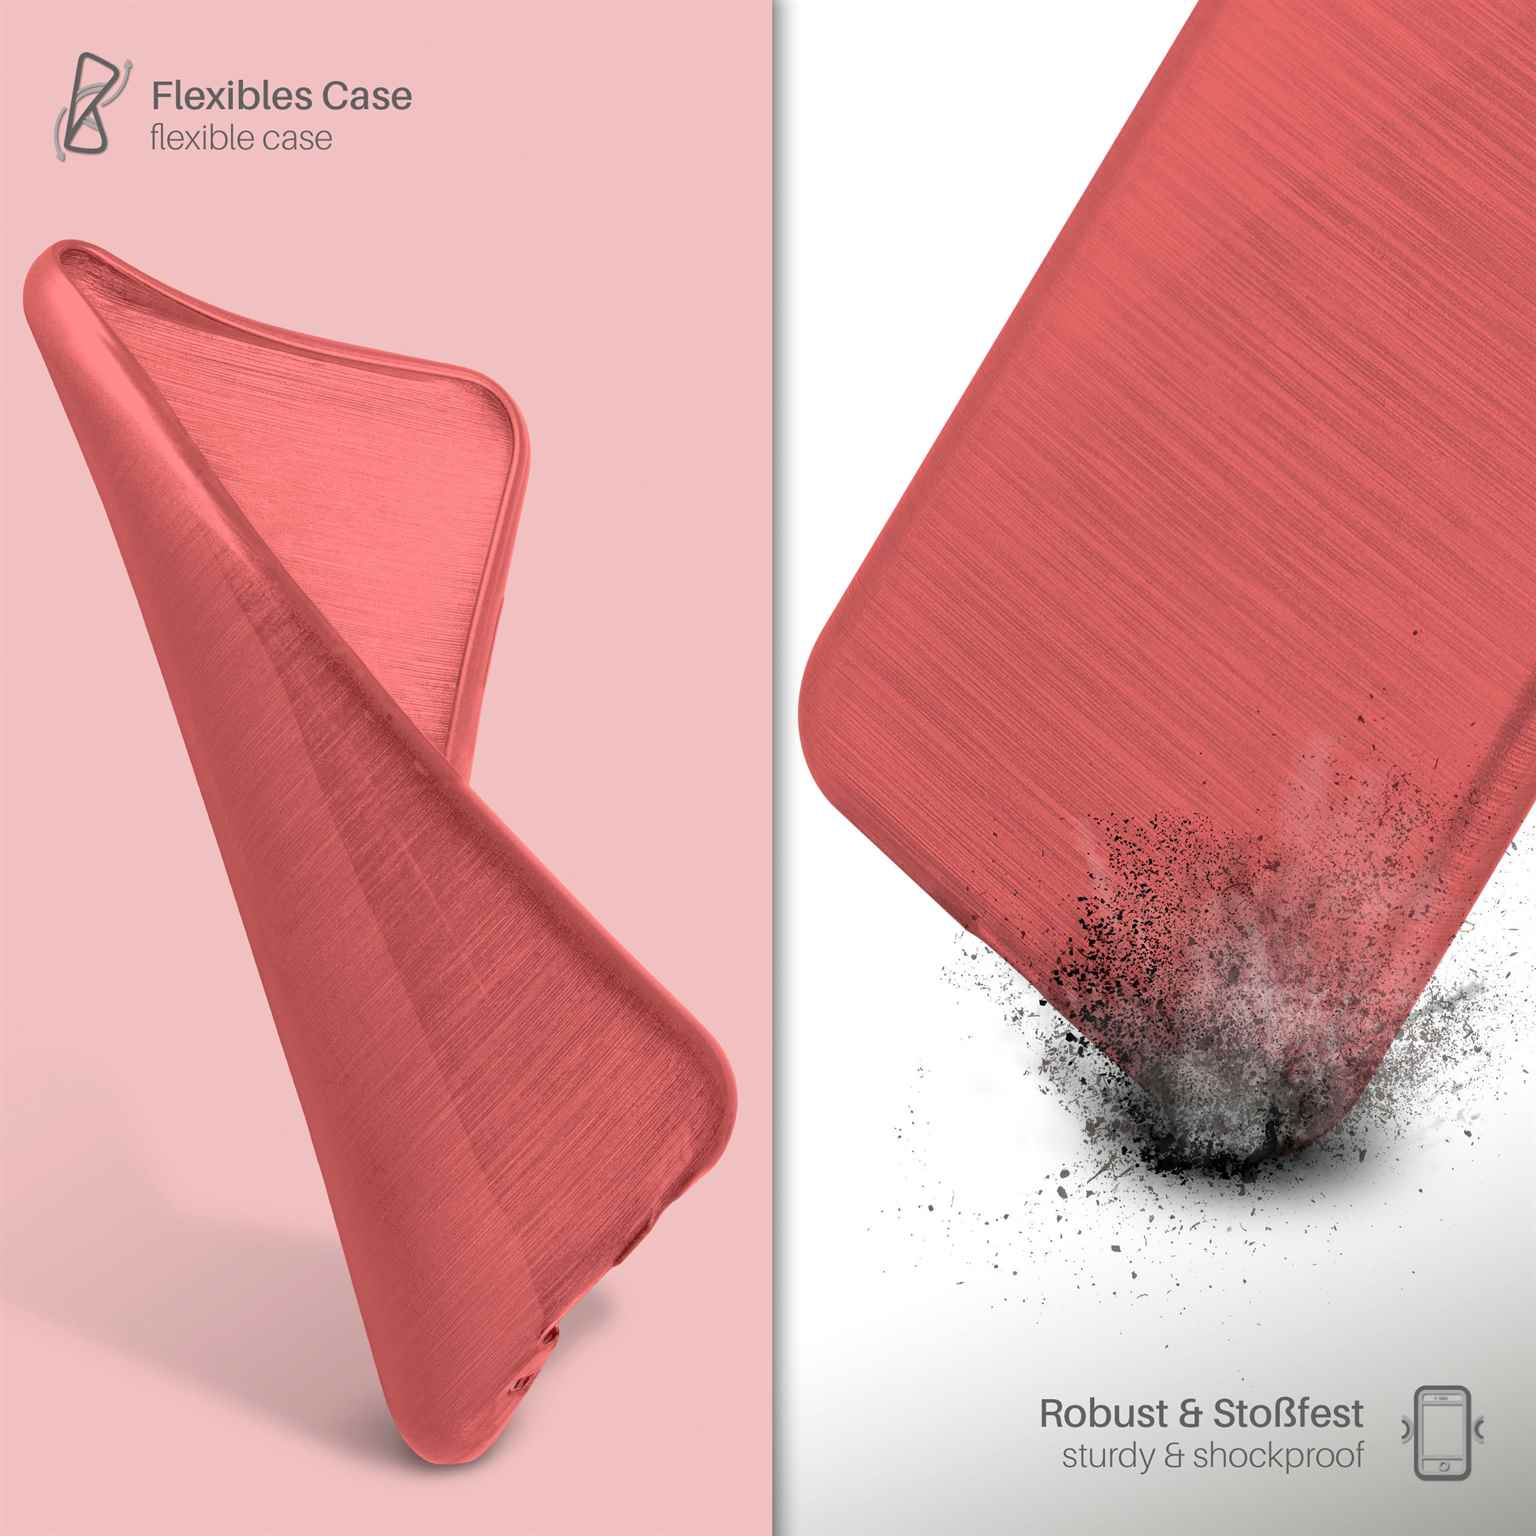 MOEX Brushed Case, Backcover, Apple, 7, iPhone Coral-Red